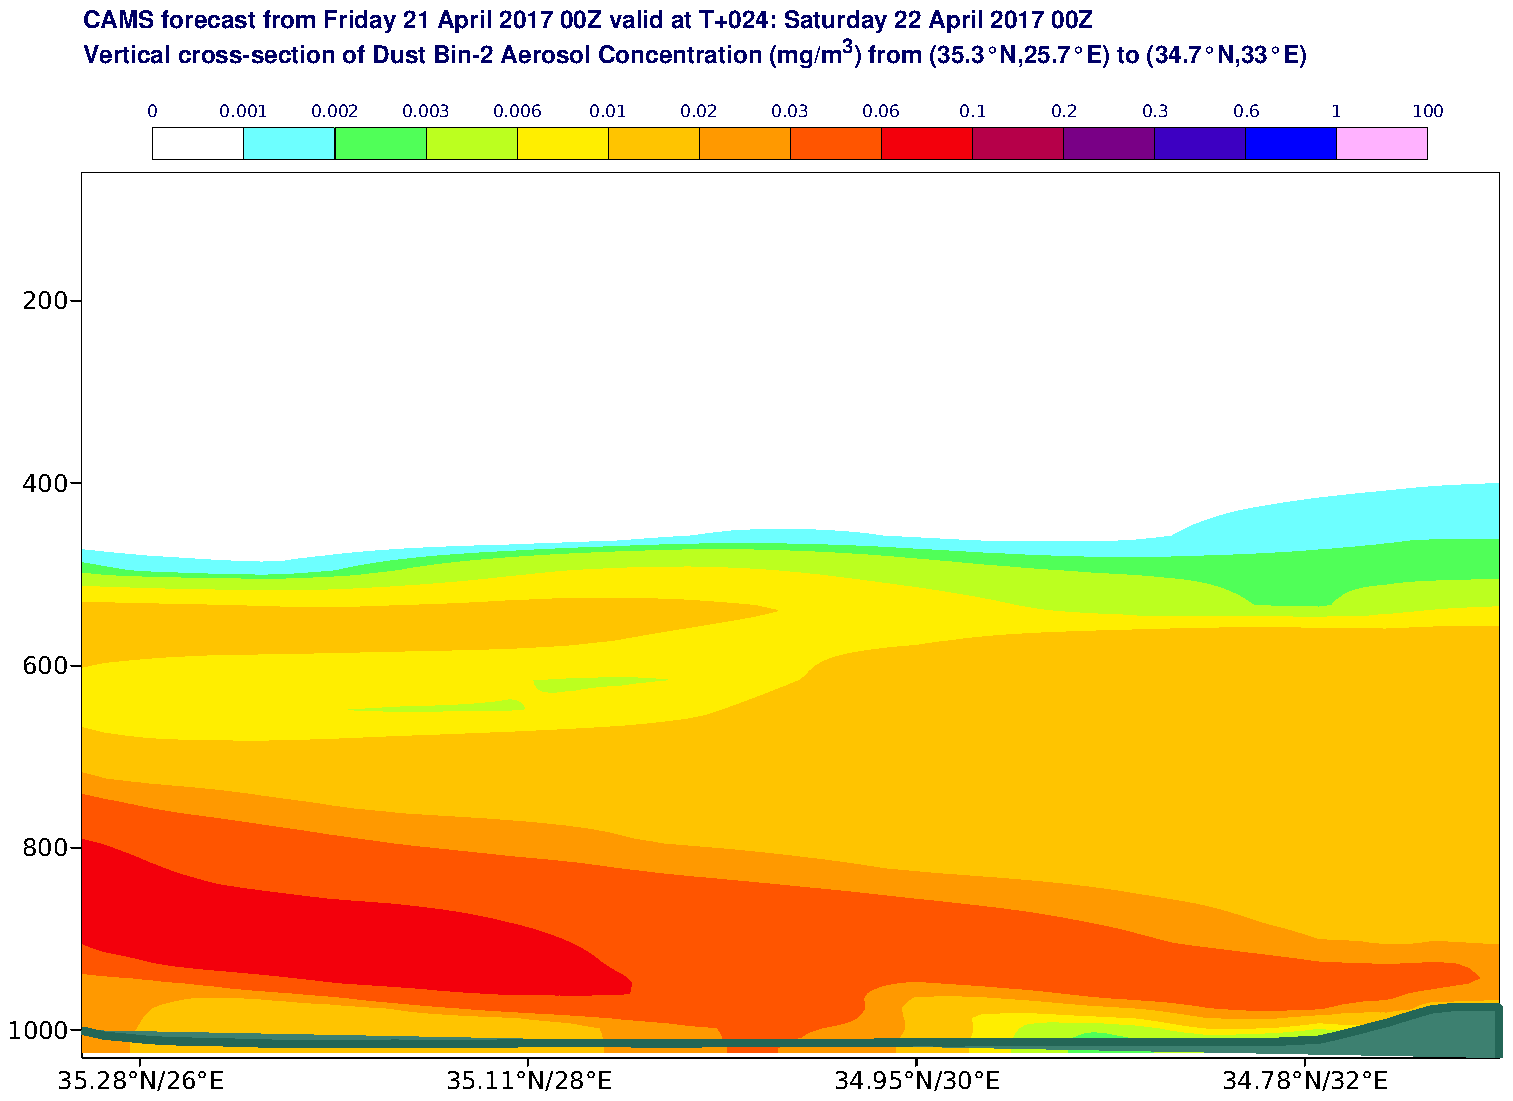 Vertical cross-section of Dust Bin-2 Aerosol Concentration (mg/m3) valid at T24 - 2017-04-22 00:00